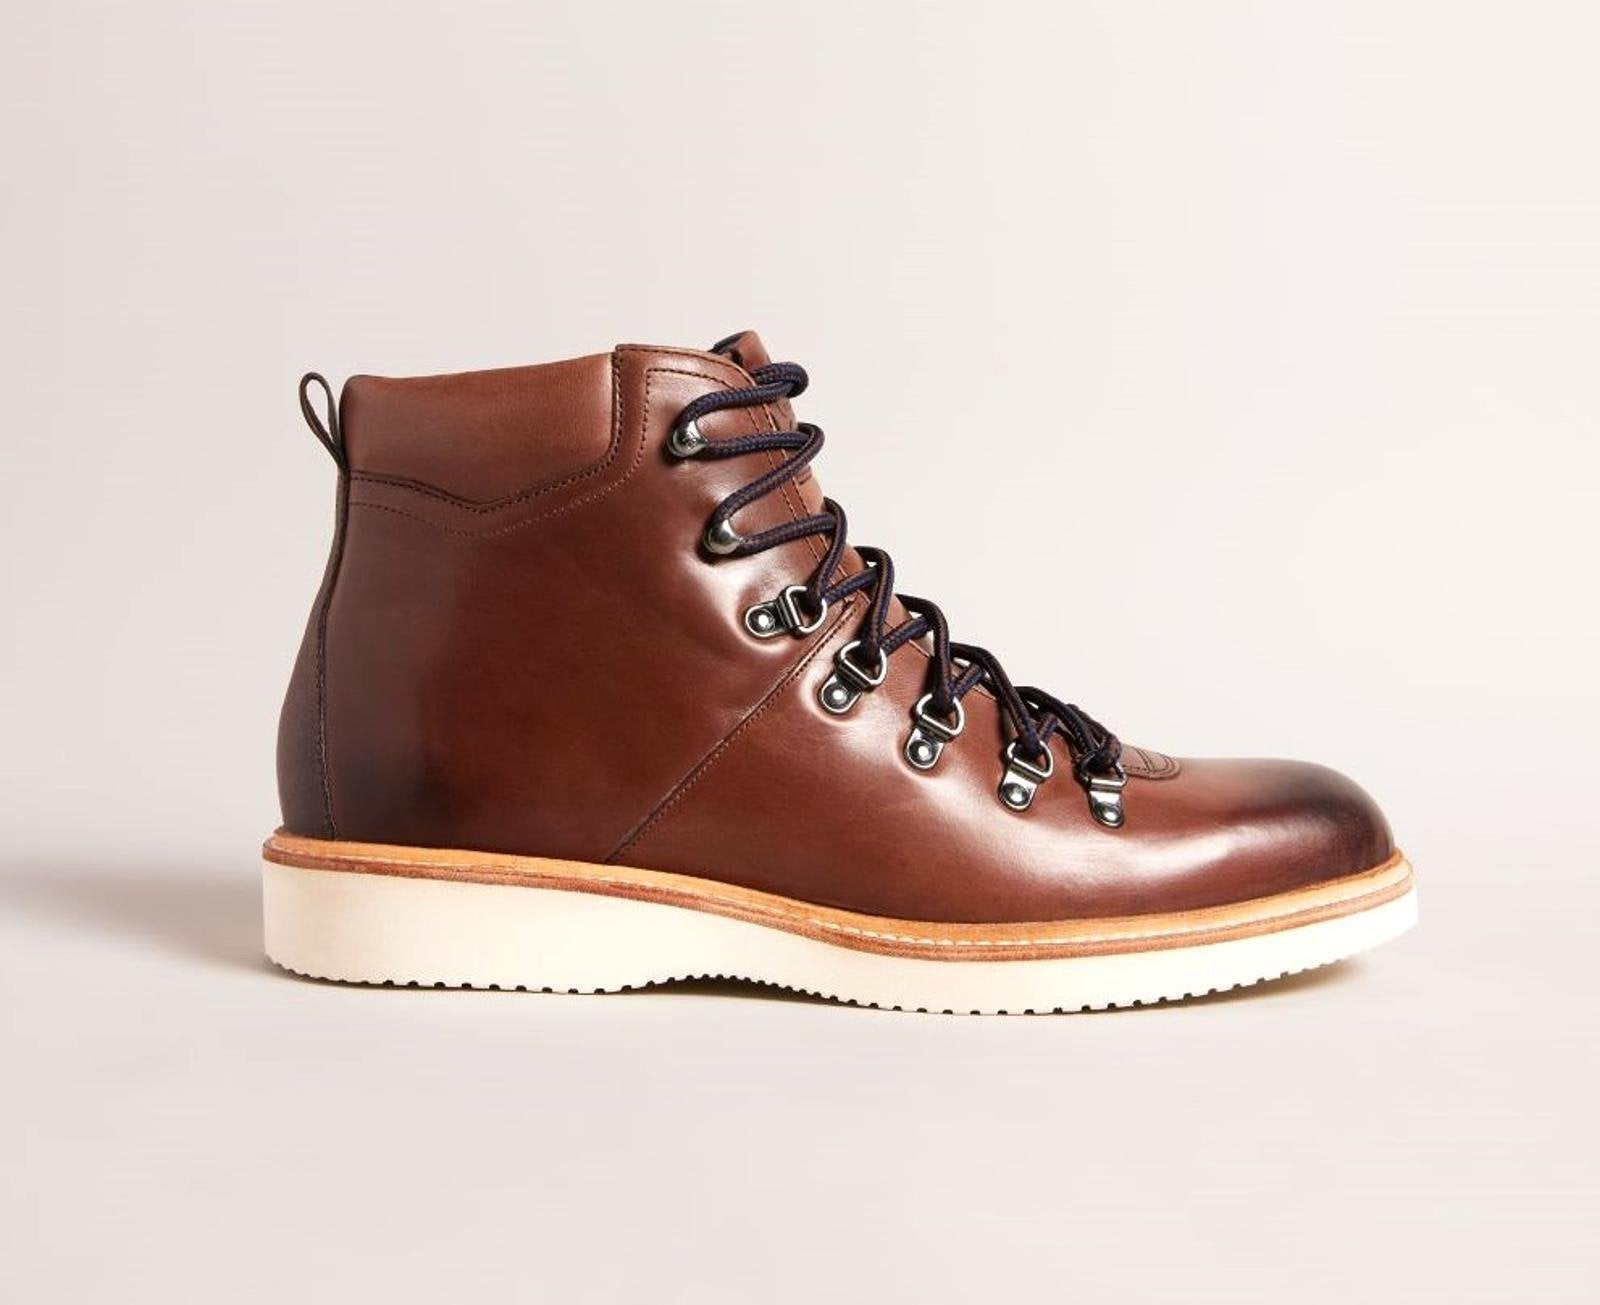 TED BAKER Liykere Men's Brown Leather Round Toe Hiker Boots